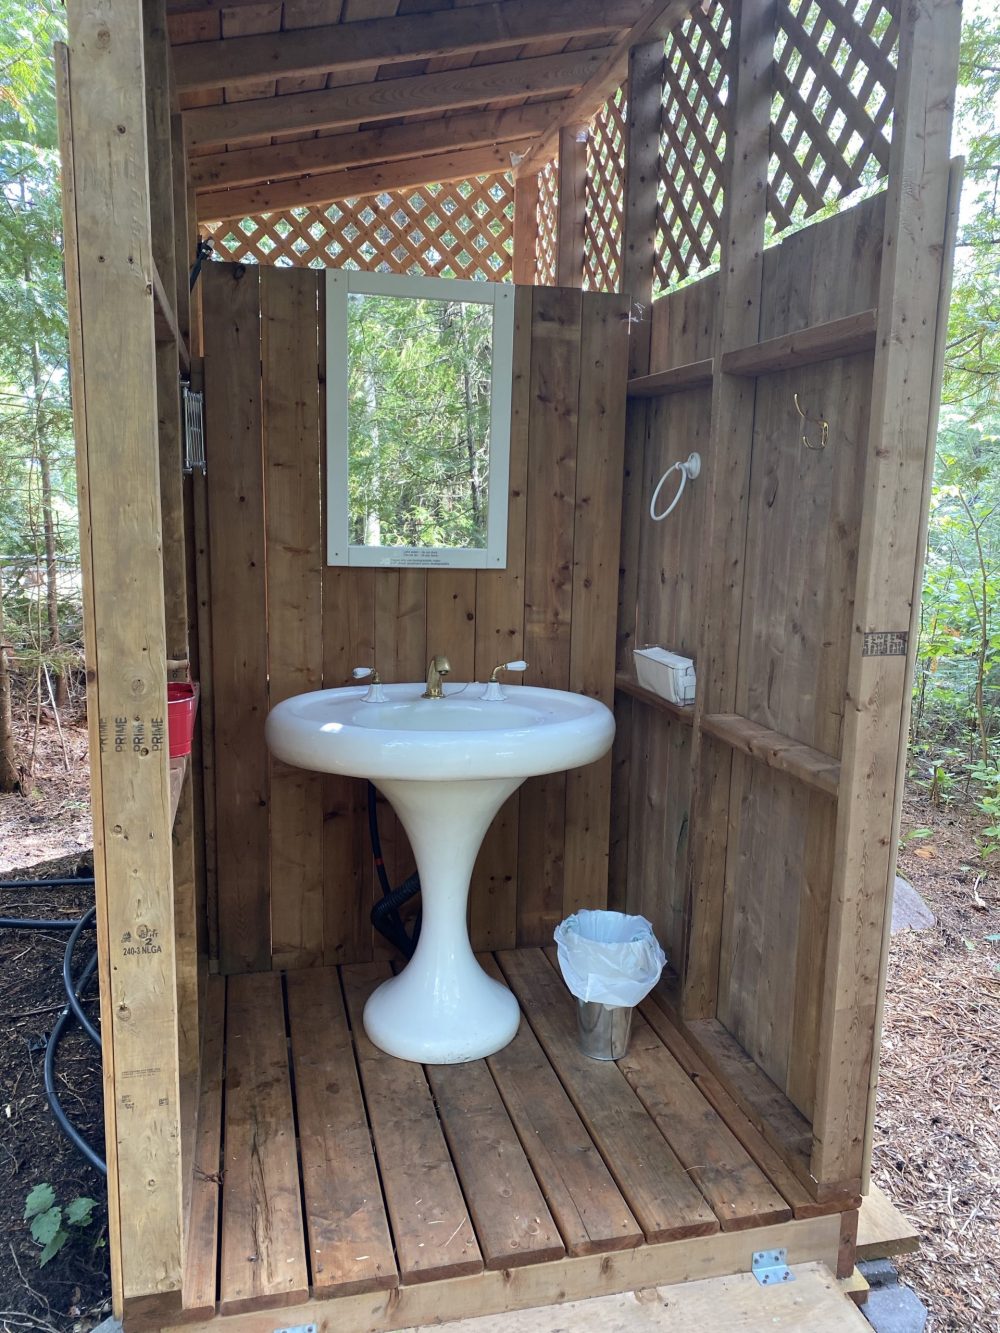 Shaving sink attached to shower facility for glamping